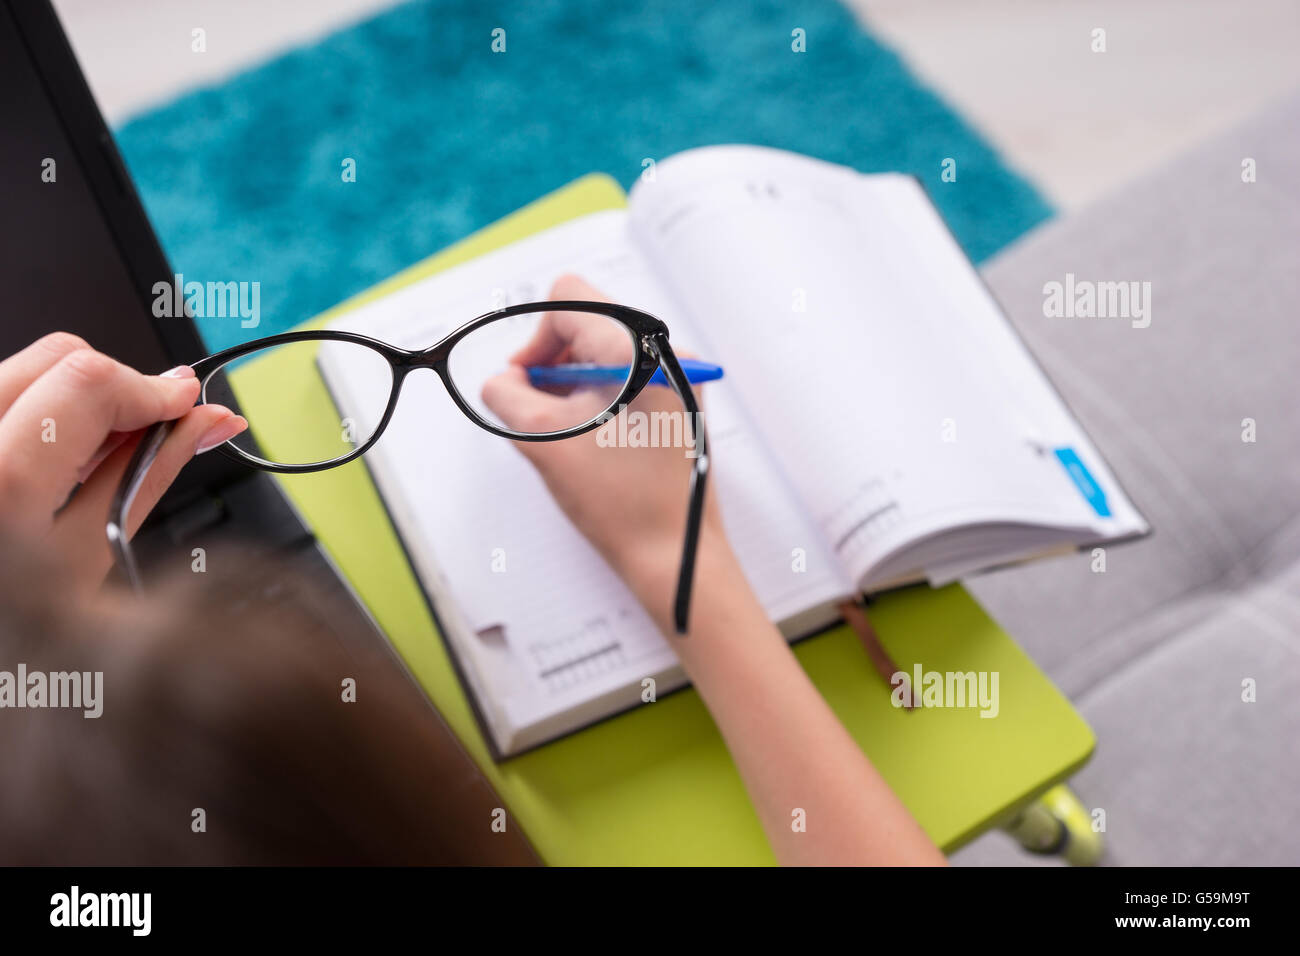 Close up view through glasses to the open blank page of a business journal or diary with a woman's hand, who holding a pen for making appointments, organising a schedule or agenda. Stock Photo